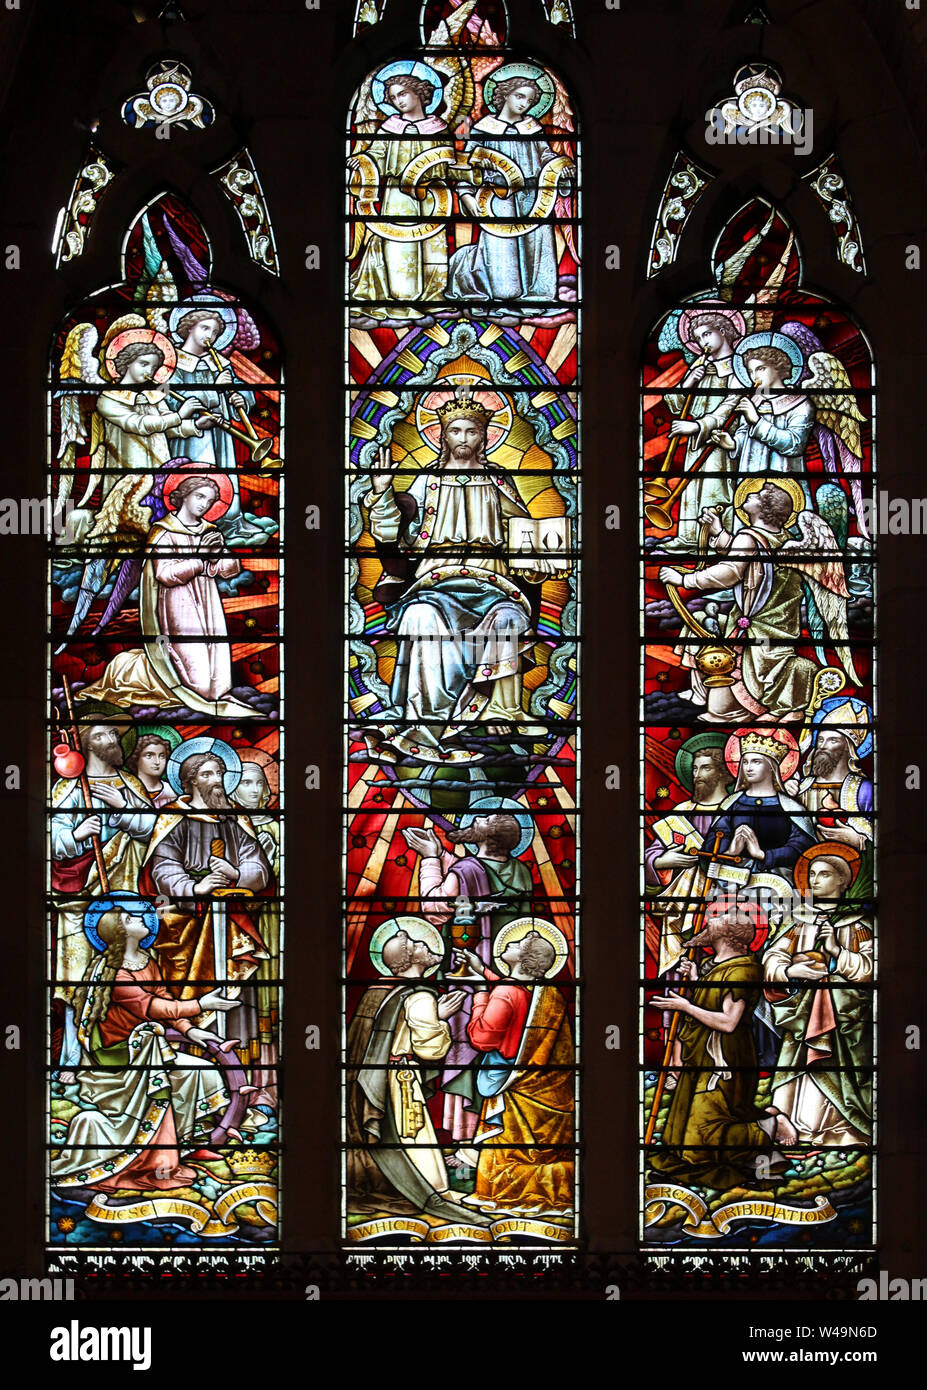 Christ in Majesty - sometimes referred to as the “martyrs window”, as many of the figures were Christian martyrs. Stock Photo